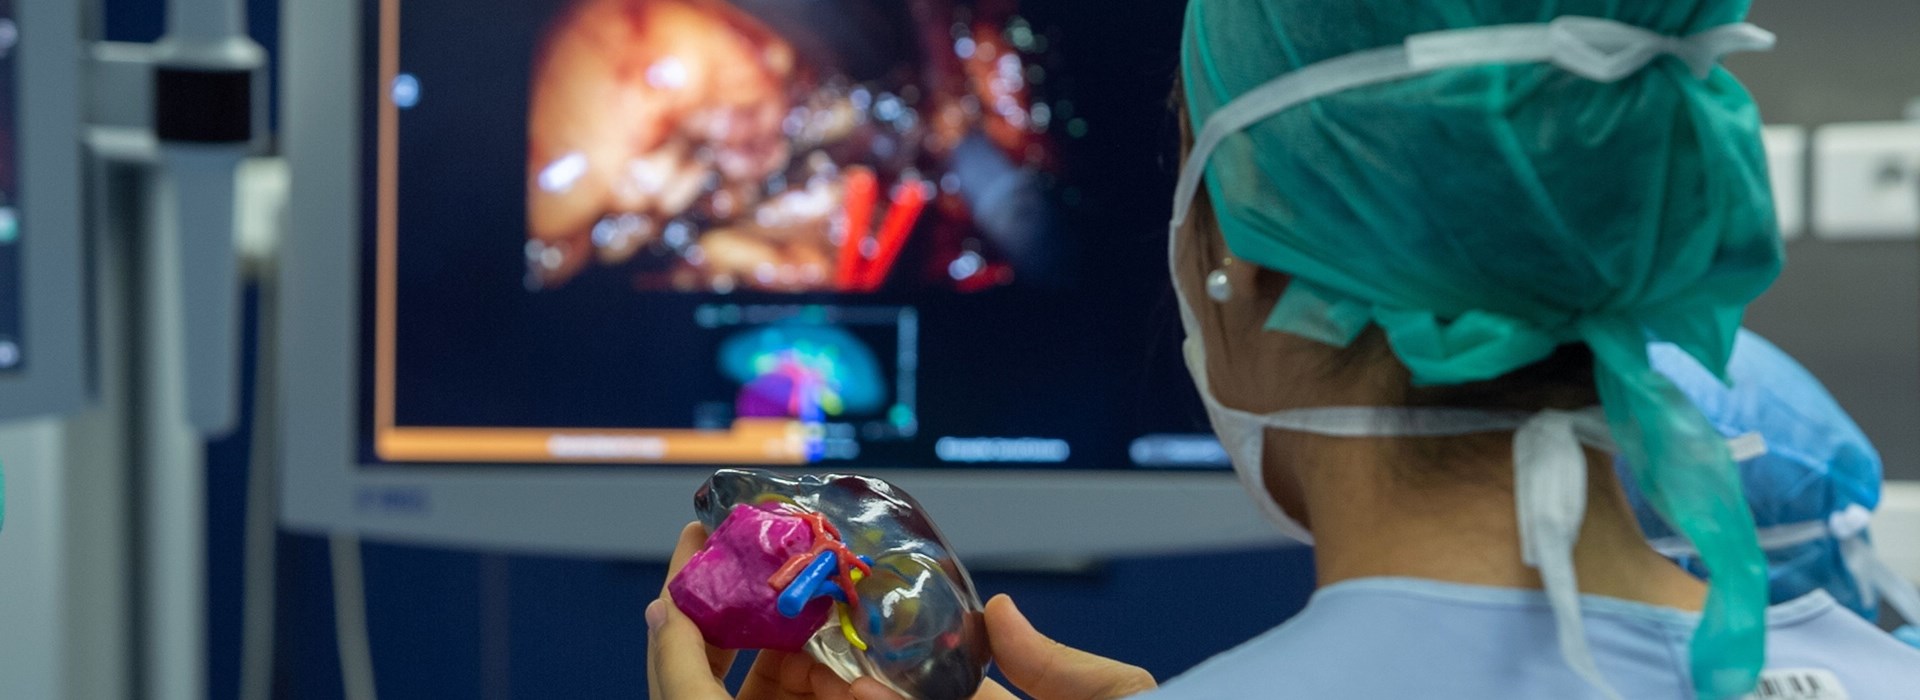 Trainee surgeon using a 3D printed model of a patient’s kidney in the operating theatre during a surgery.